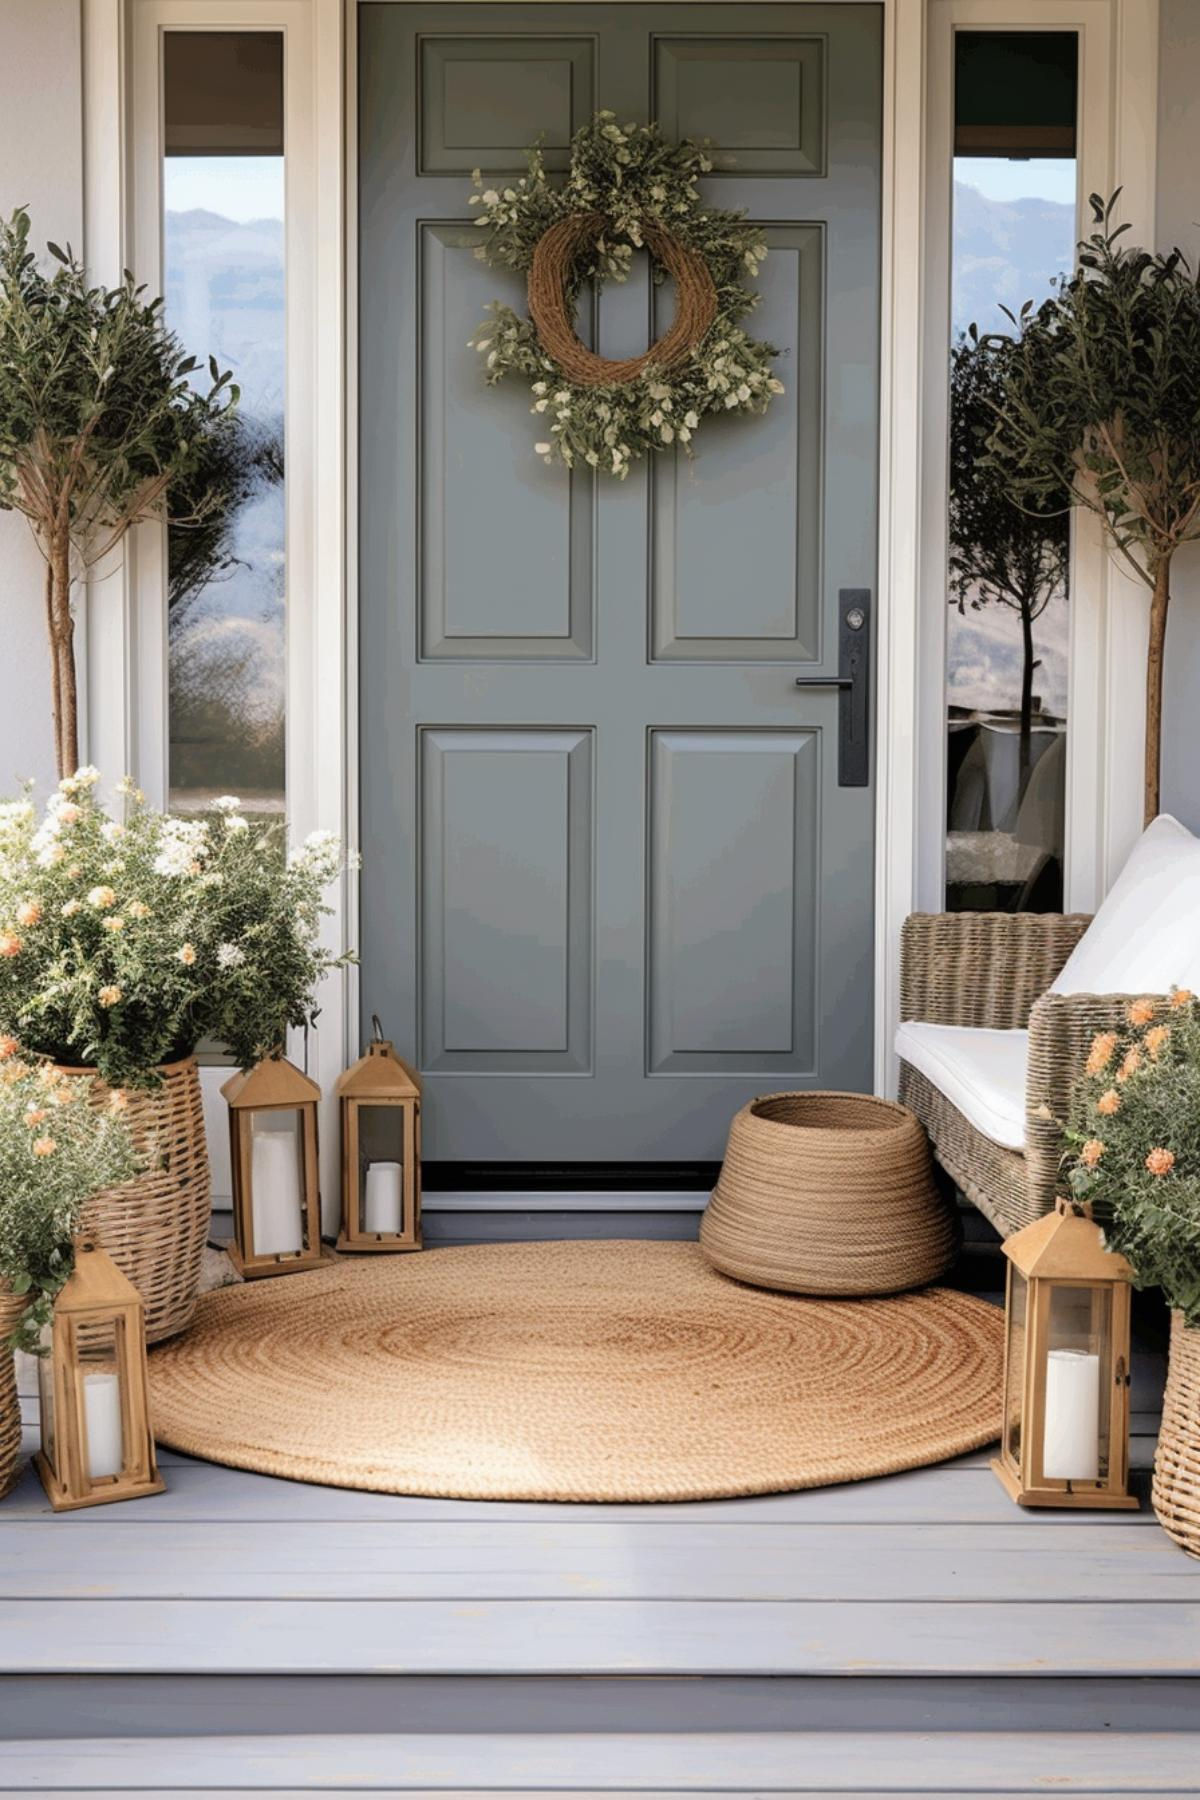 Transform Your Porch with These Spring Decor Ideas